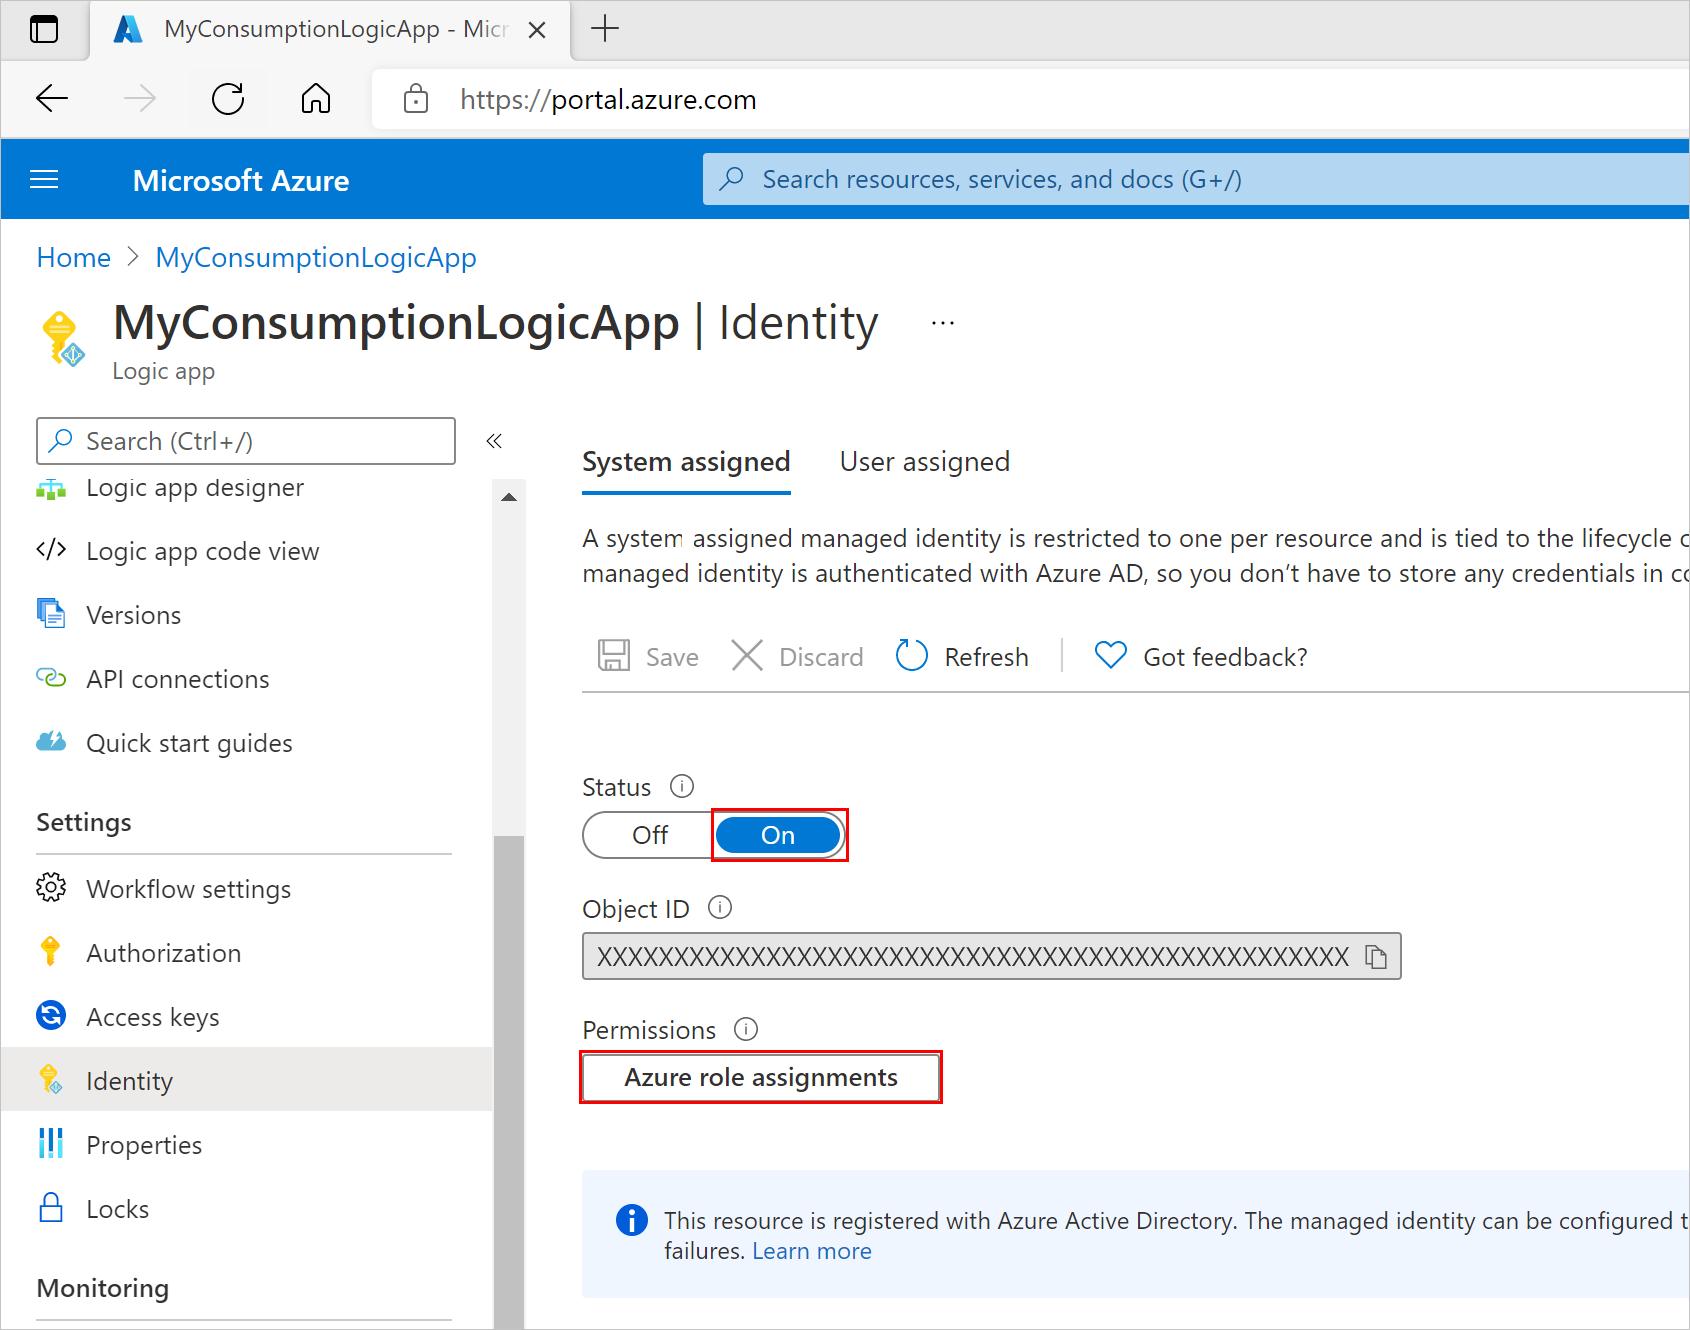 Screenshot showing the Azure portal and logic app resource menu with the 'Identity' settings pane and 'Azure role assignment permissions' button.